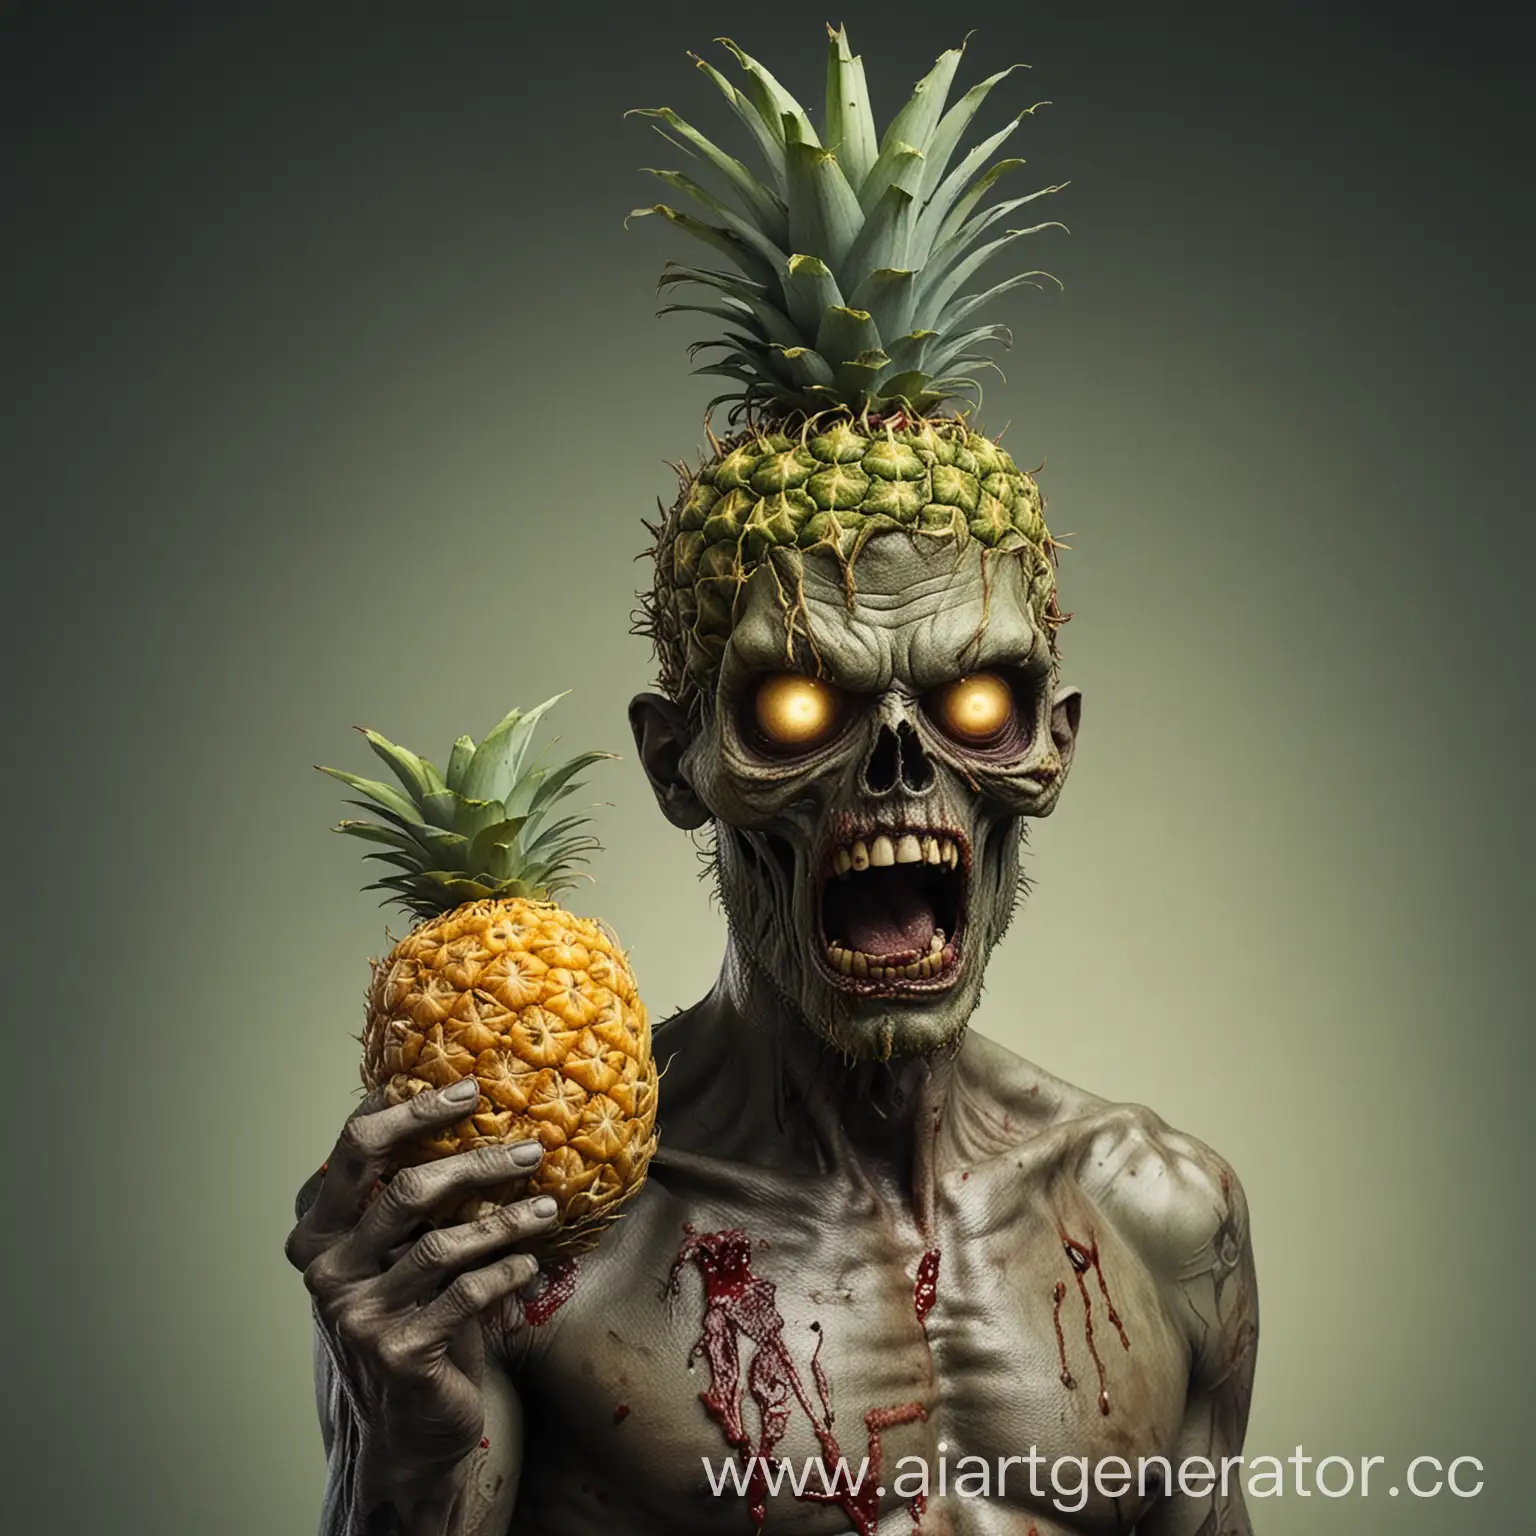 A zombie with a pineapple for a head